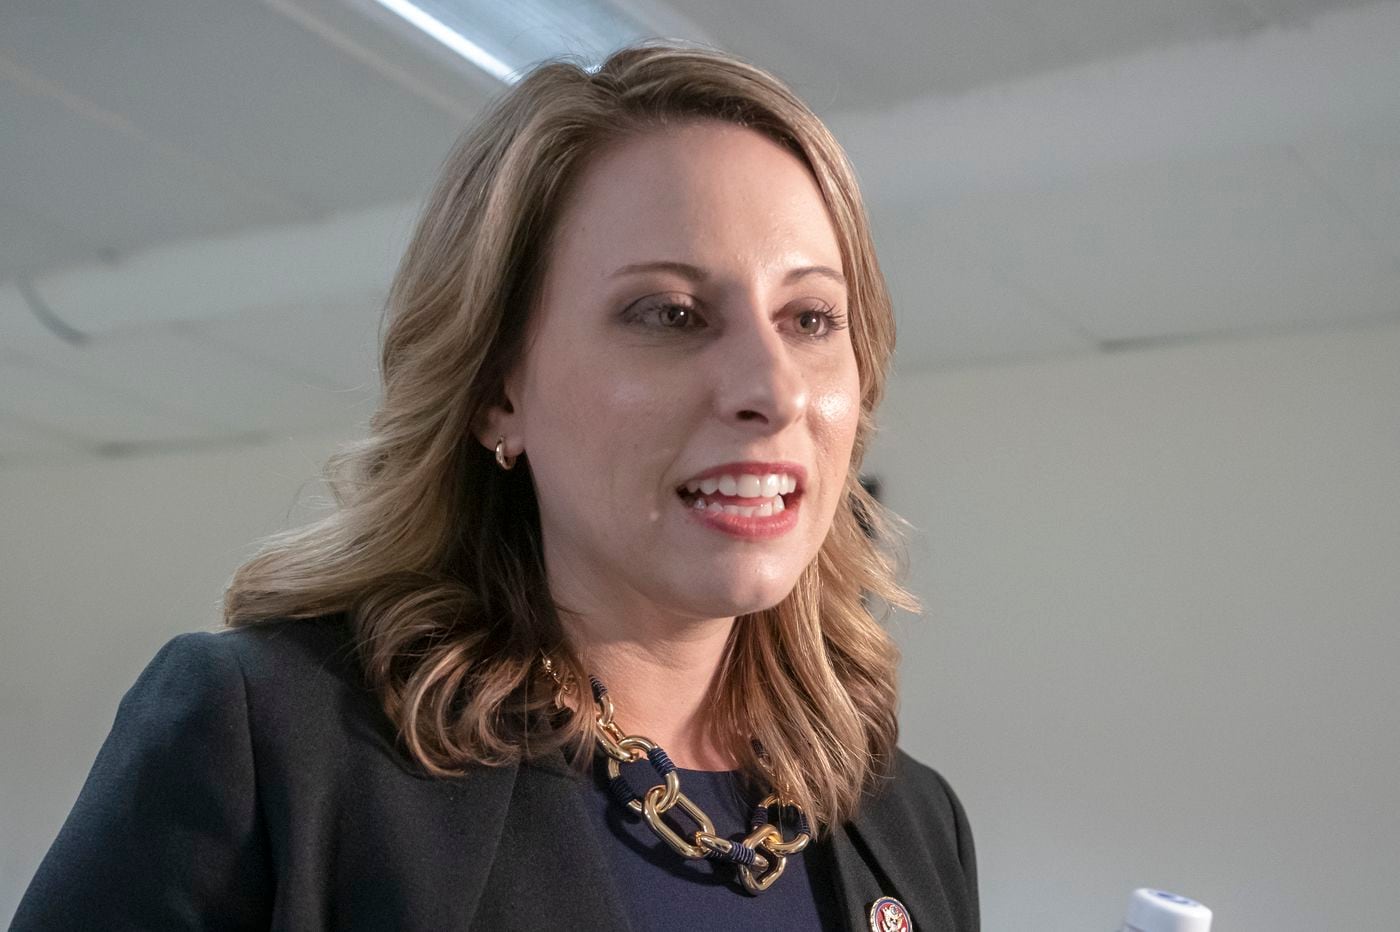 The Hills Porn - Rep. Katie Hill resigned because she behaved unethically ...